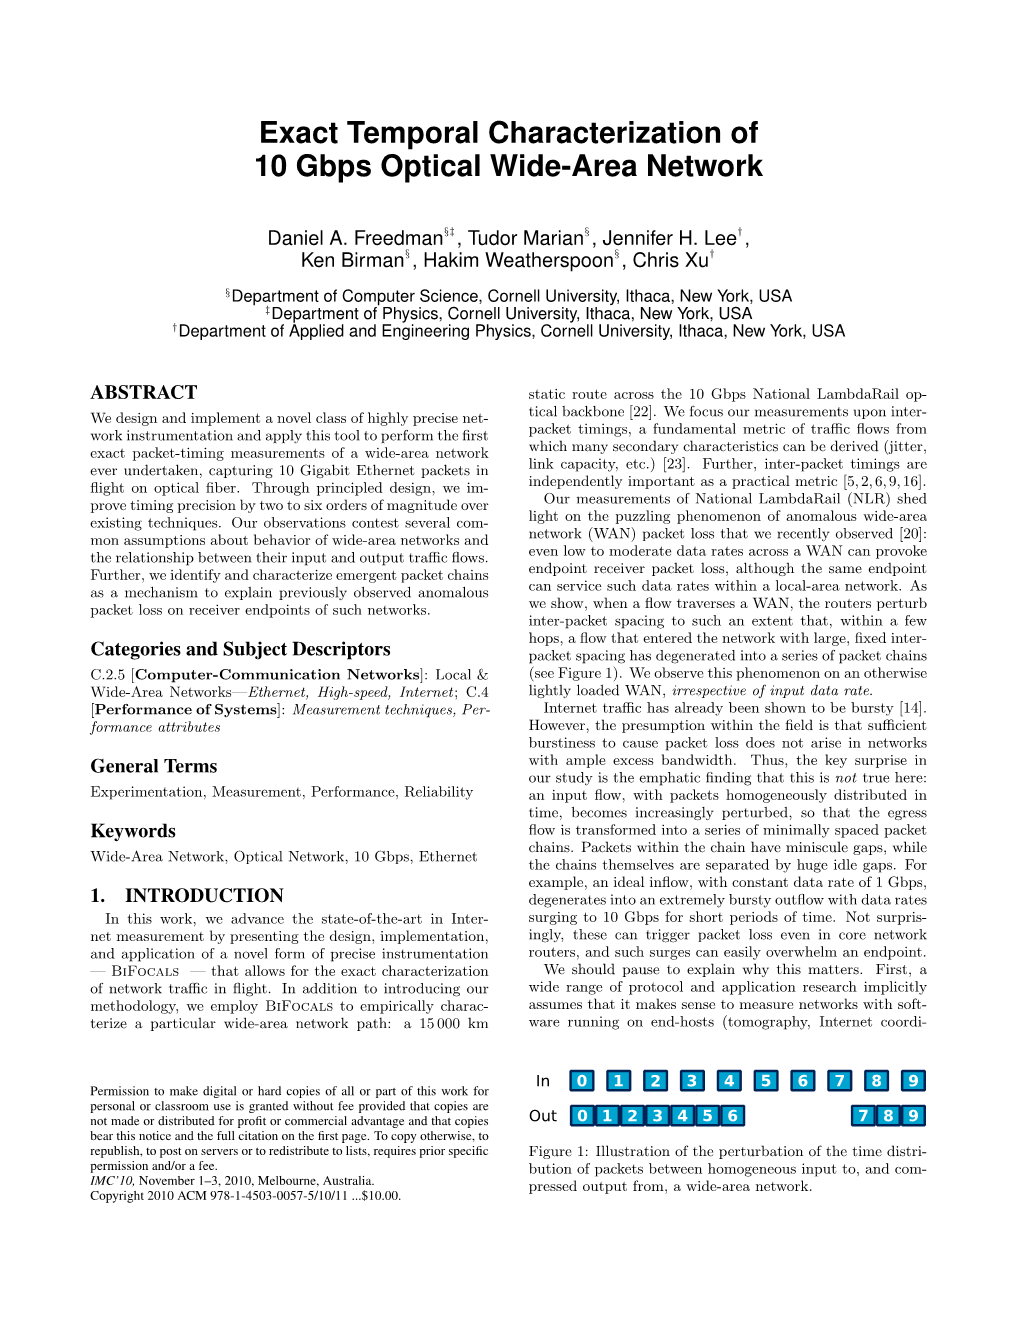 Exact Temporal Characterization of 10 Gbps Optical Wide-Area Network